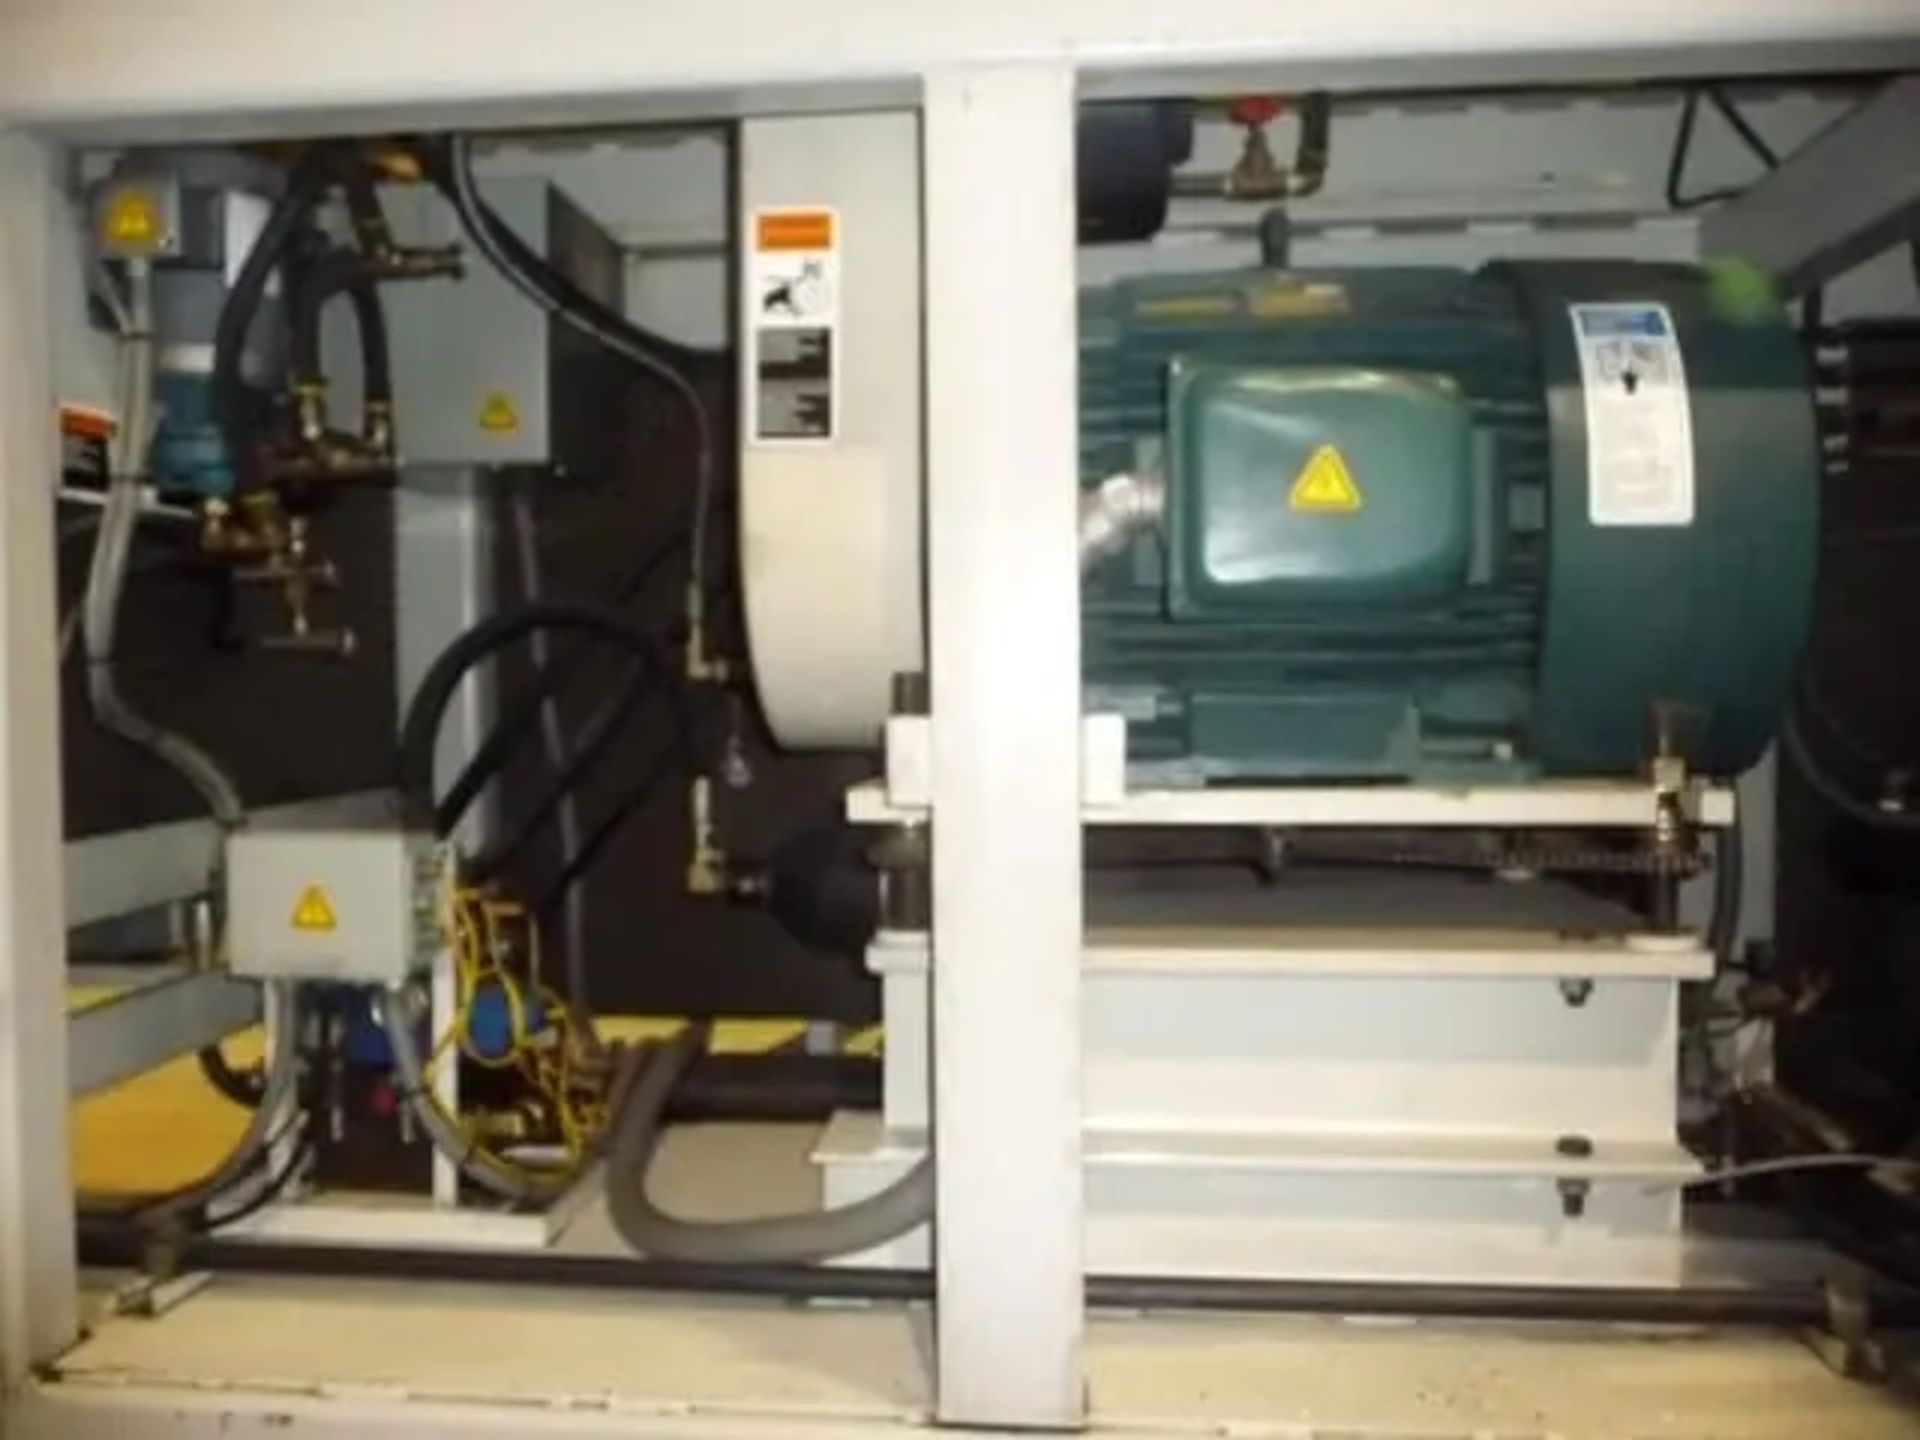 2005 Uniloy R2000, Blow Molder with (2) Heads - Image 14 of 18